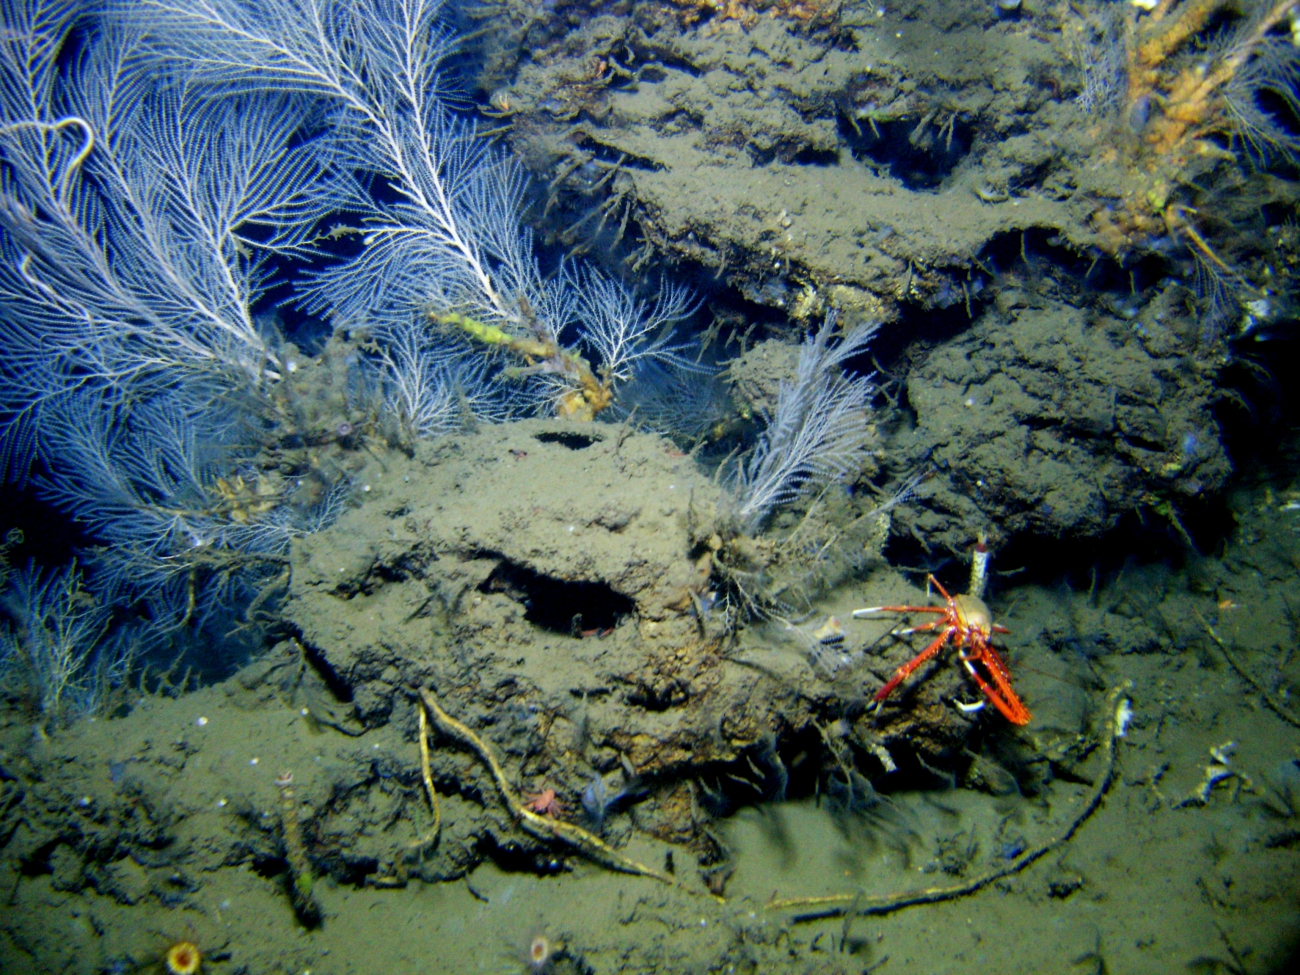 A cold seep site with a few lamellibranchian tube worms, a Callogorgia americana coral bush, and a large orange and white squat lobster